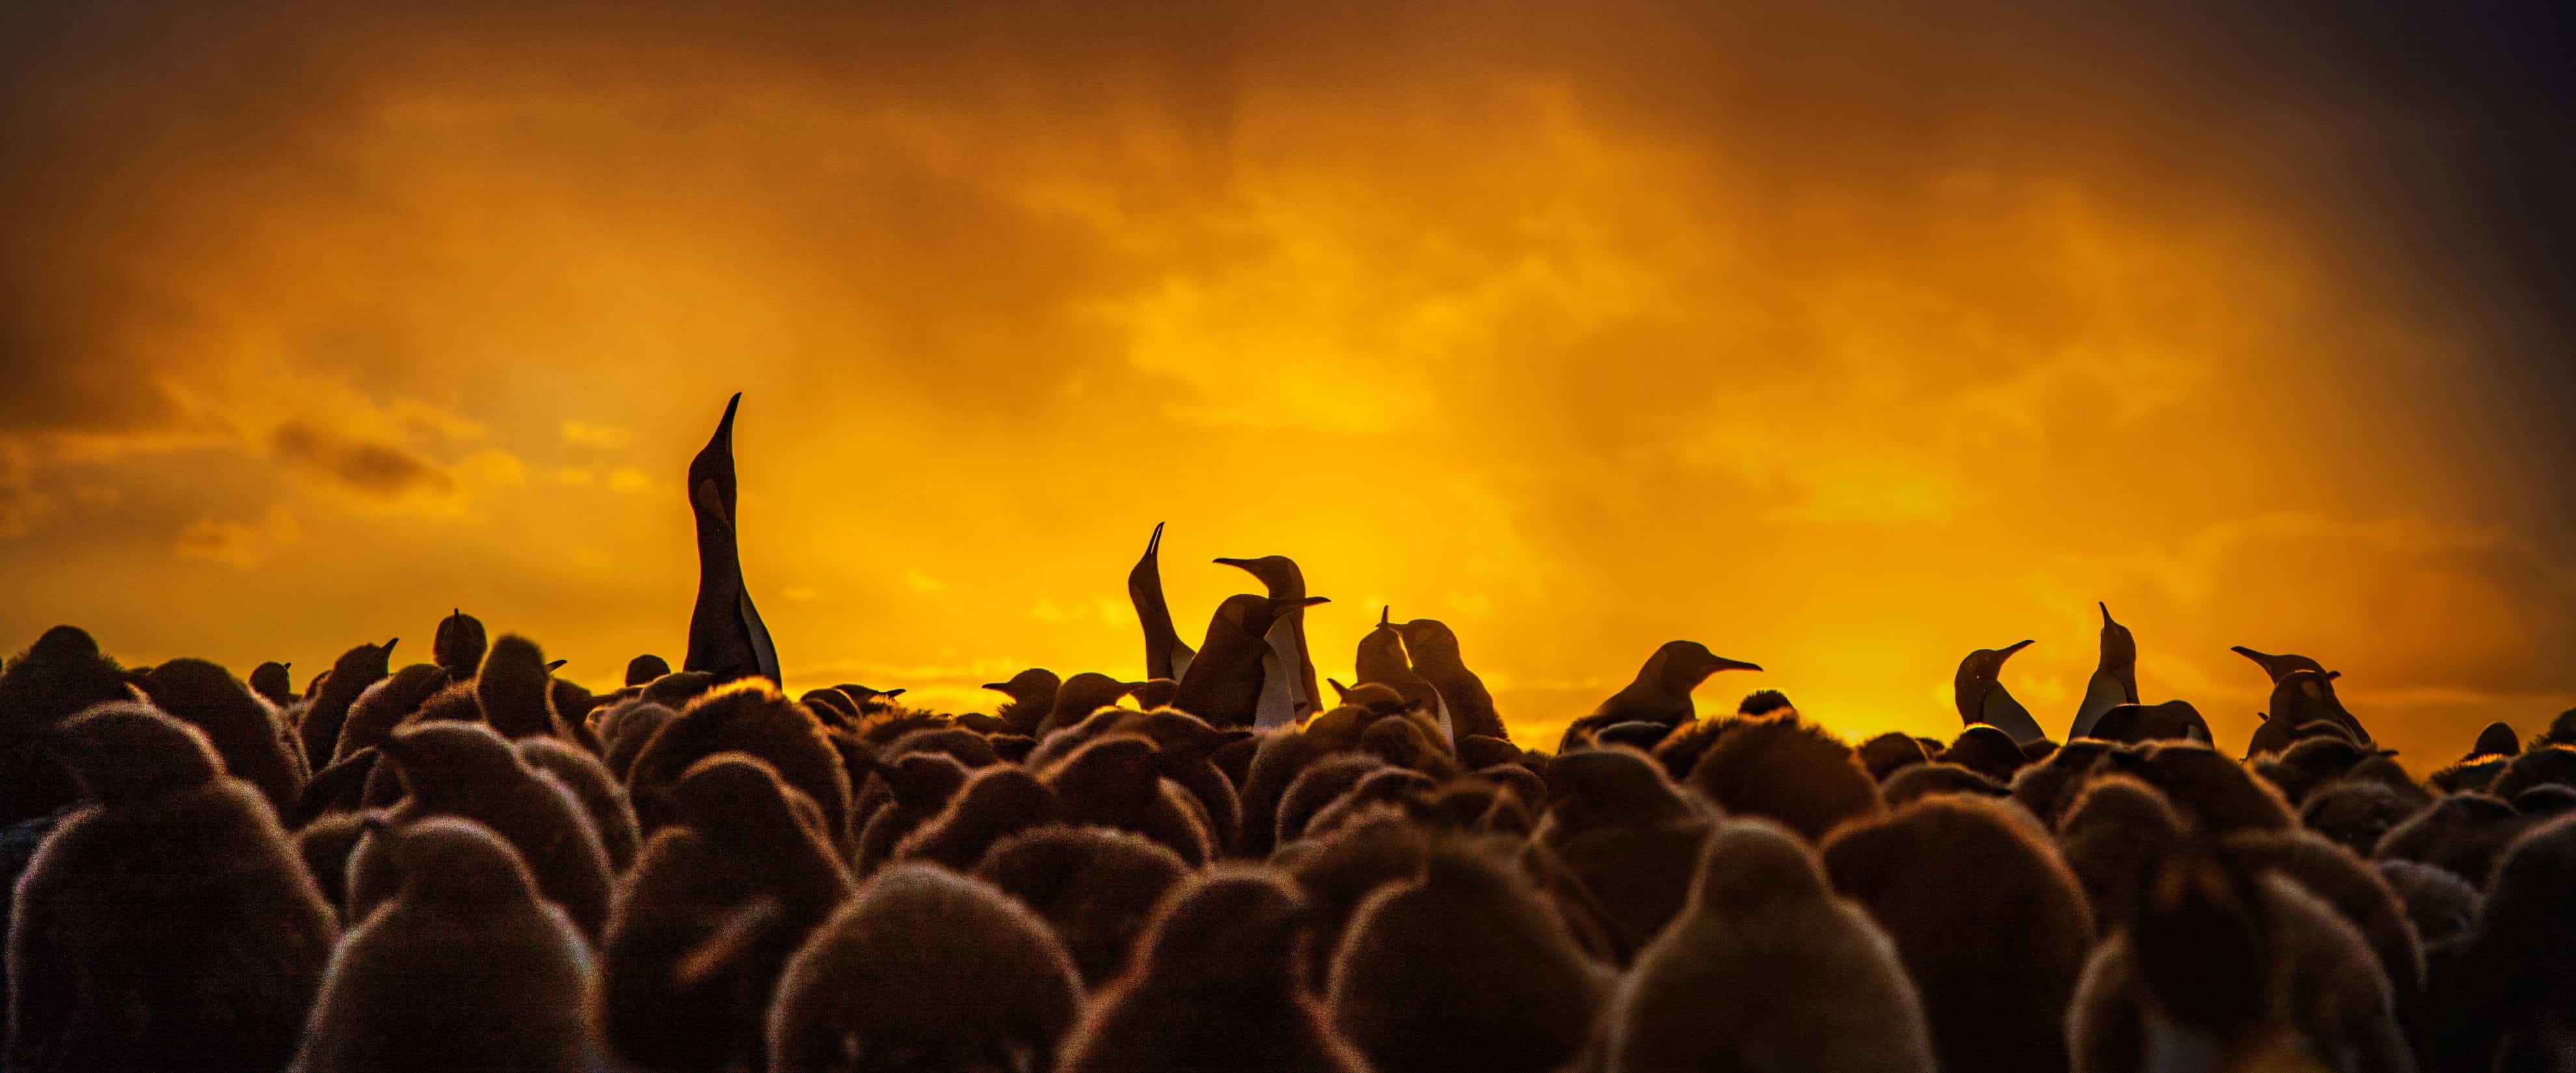 A dramatic photo of a crowd of penguins, some jutting above the rest, to the backdrop of a red and orange sky.